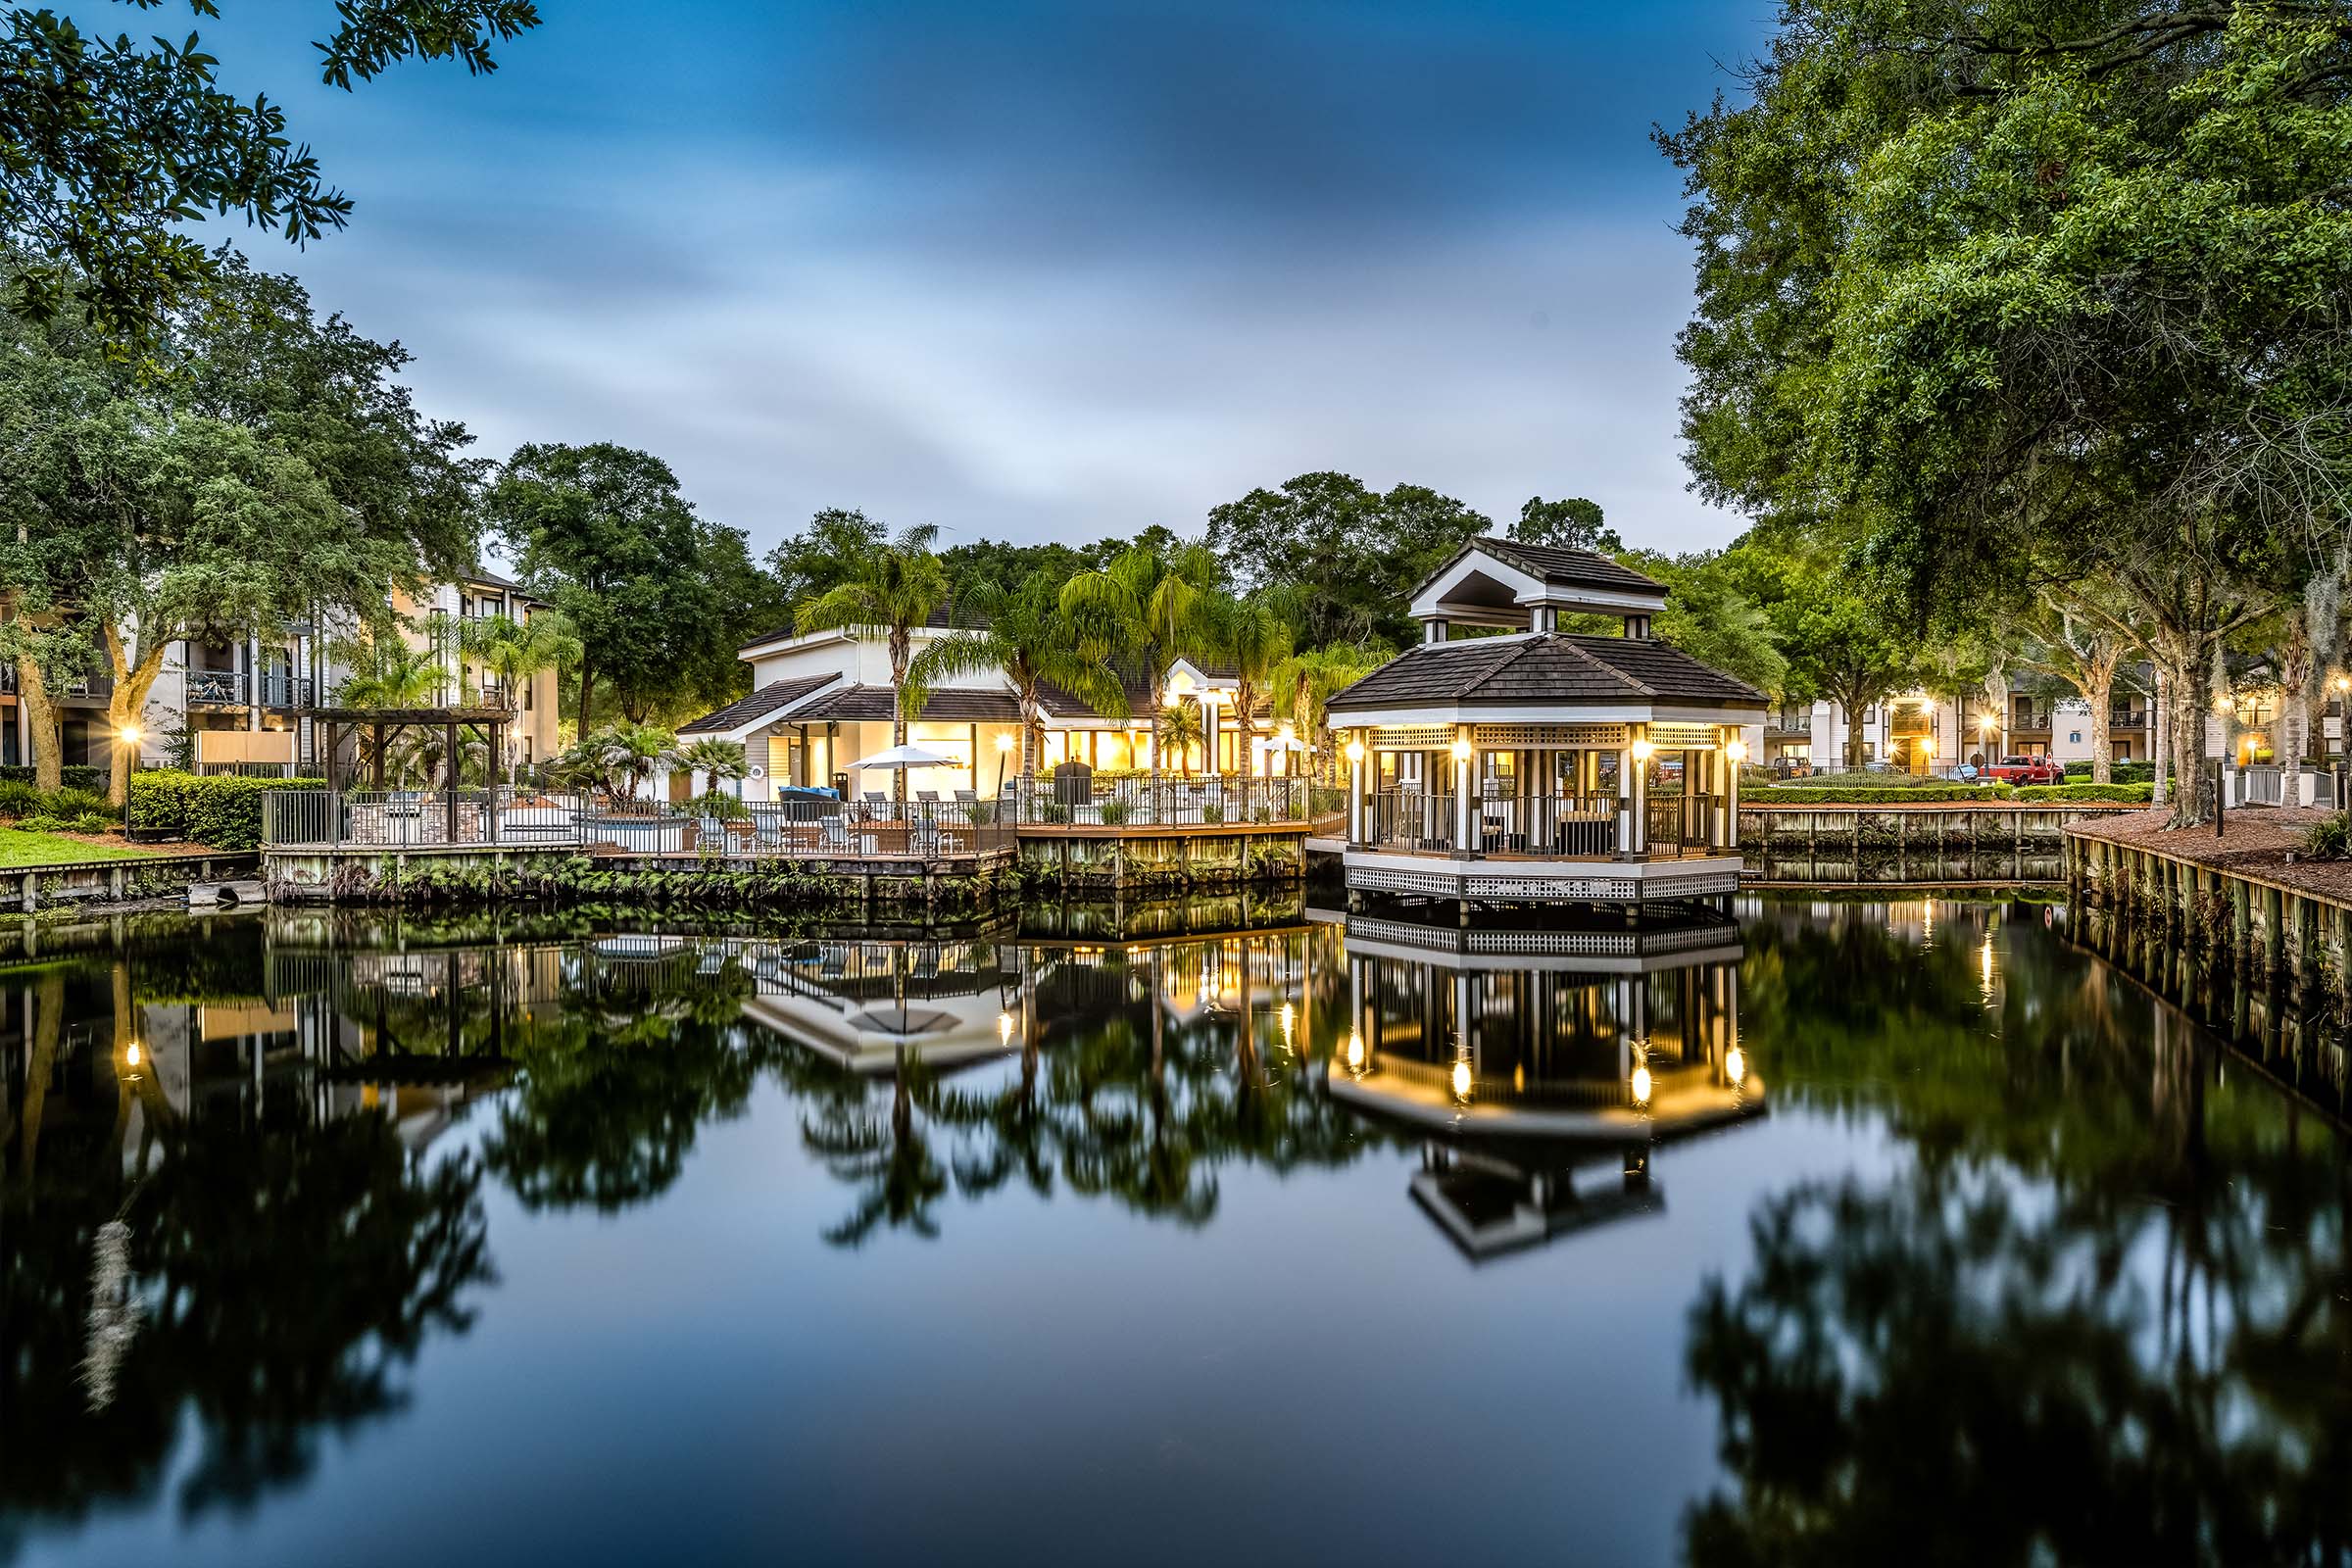 Evening view of the gazebos and clubhouse at the Meridian